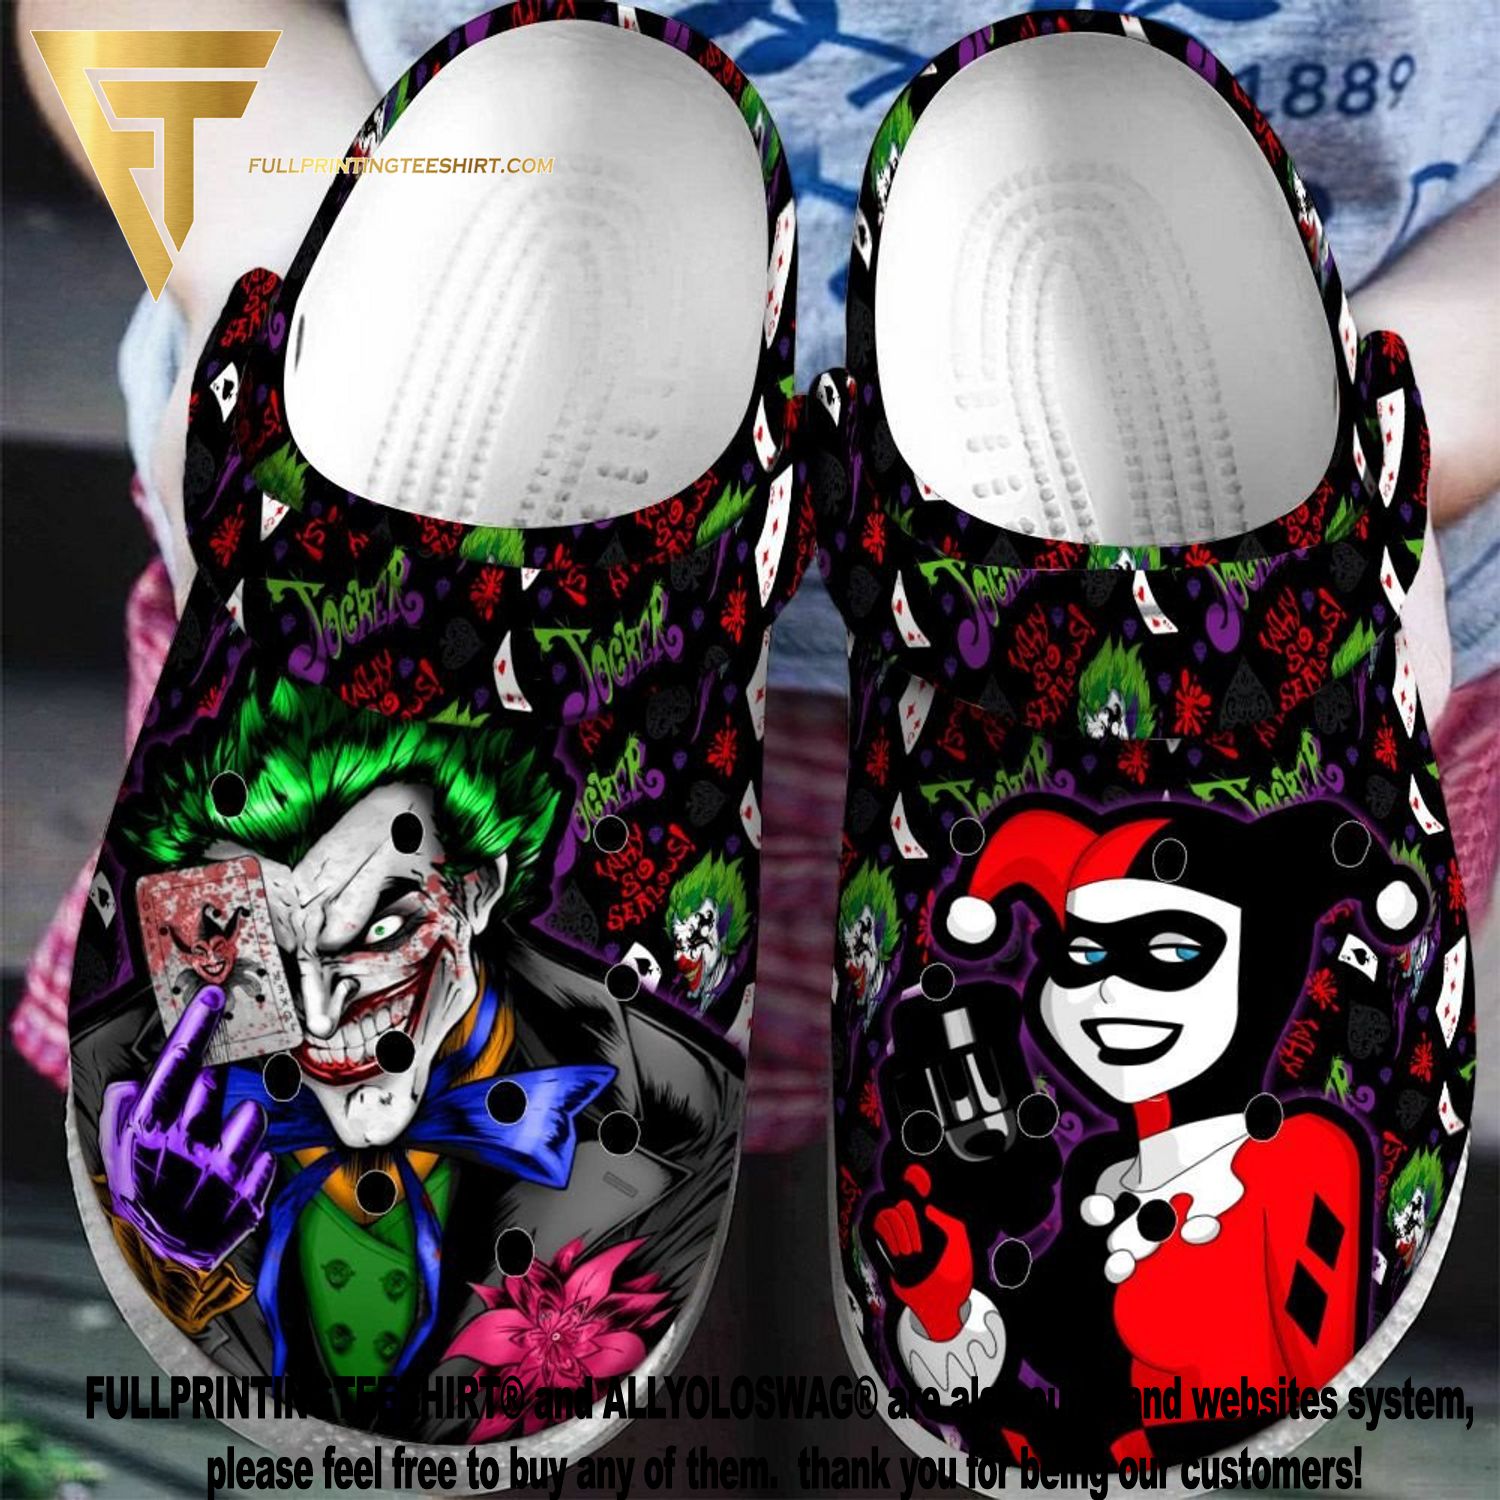 Crazed Kicks and Chaos Unleashed: The Harley Quinn Crocs and the Anticipated Harley Quinn Season 4